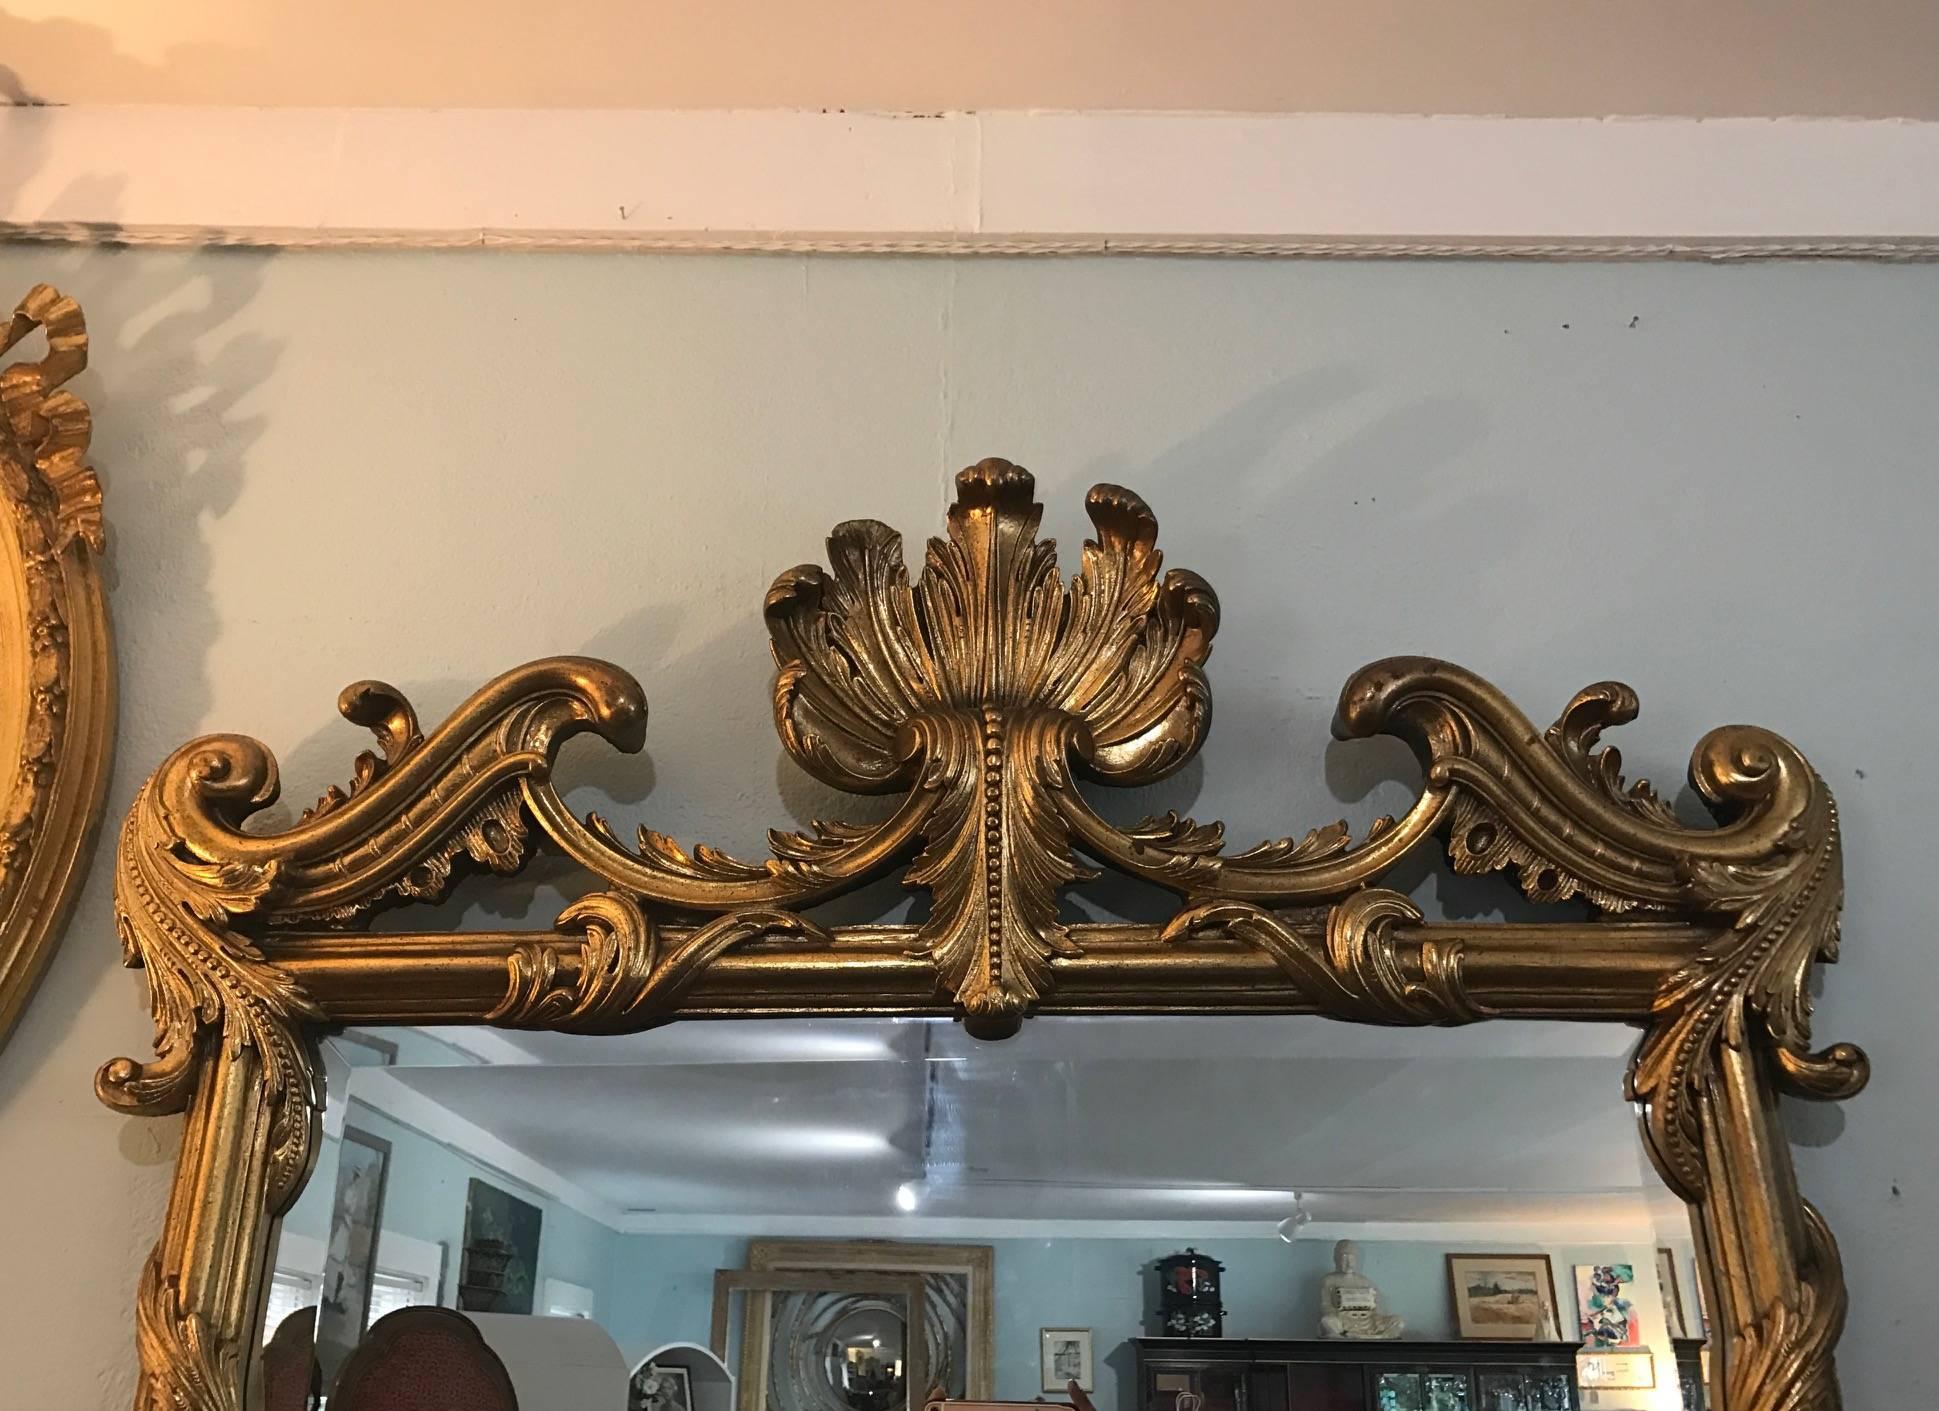 La Barge handcrafted mirror hand-carved and gilded seashell design wall mirror. A finely carved French Hollywood regency style wall or console mirror. Beautiful seashell design and scroll work. La Barge mirrors are designed by Well Traveled